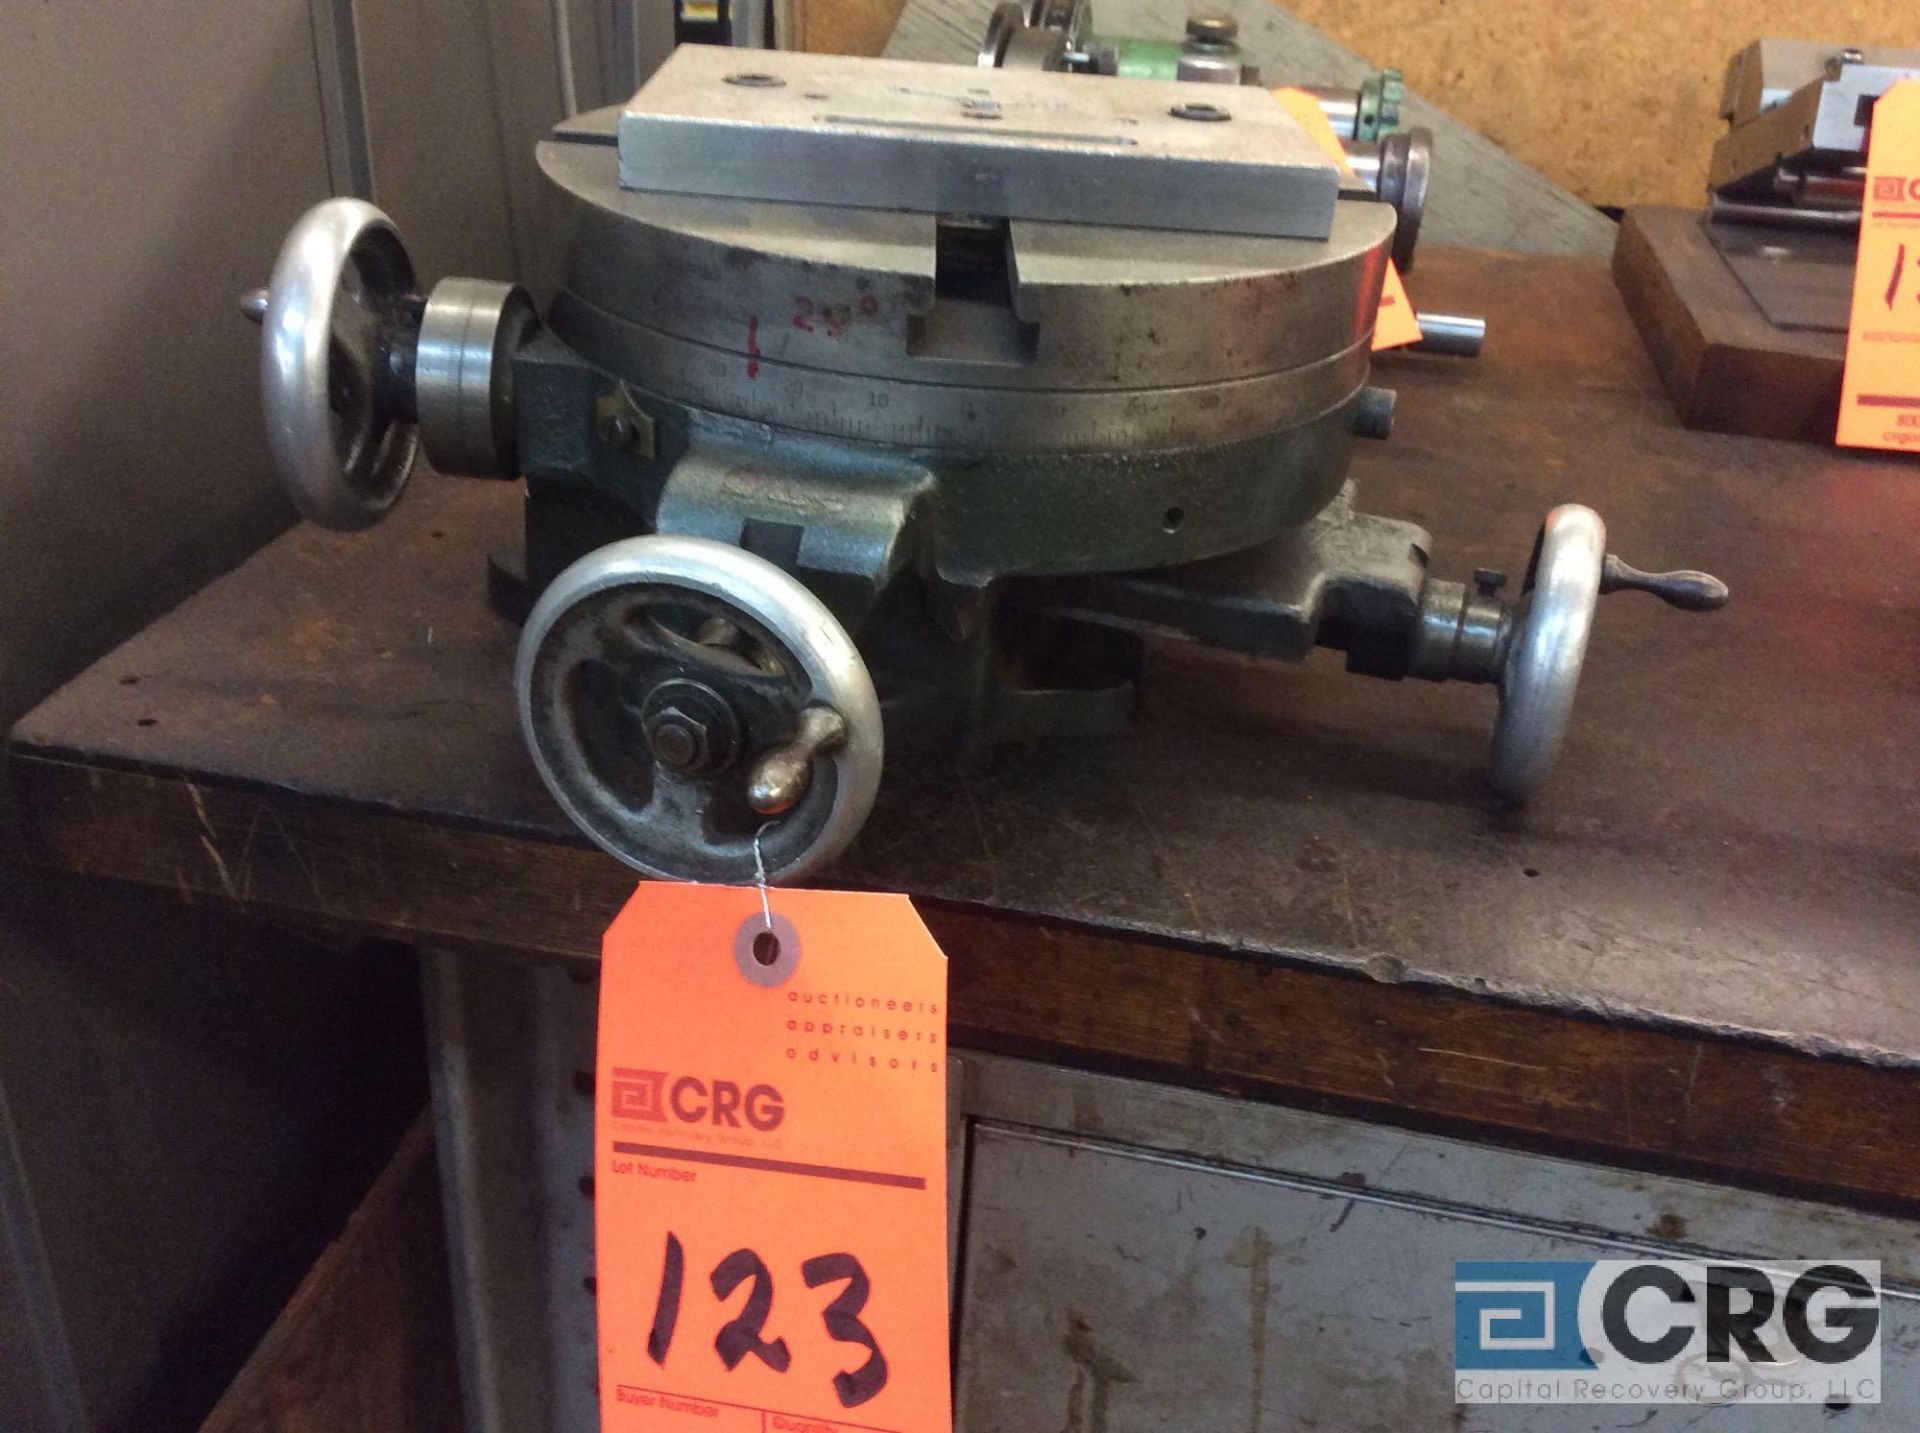 Compound slide rotary table, 8 inch diameter (LOCATED IN TOOL ROOM MACHINE SHOP)